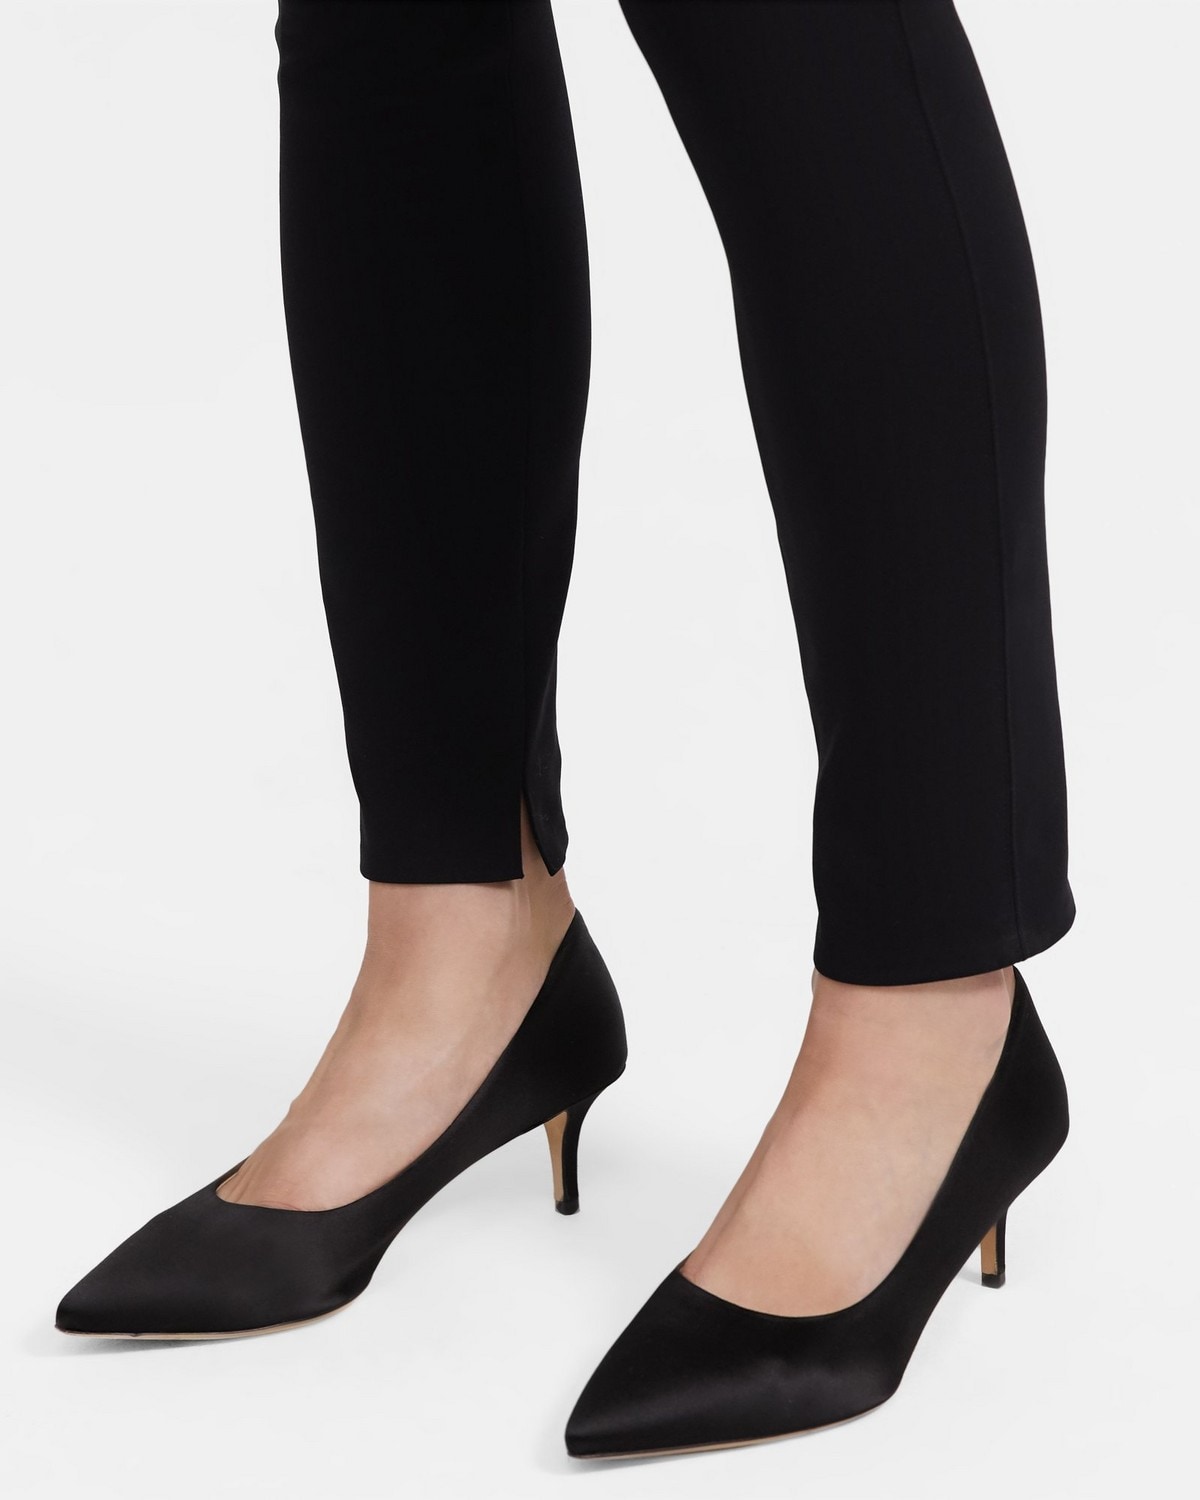 Theory City 55 Pump in Satin